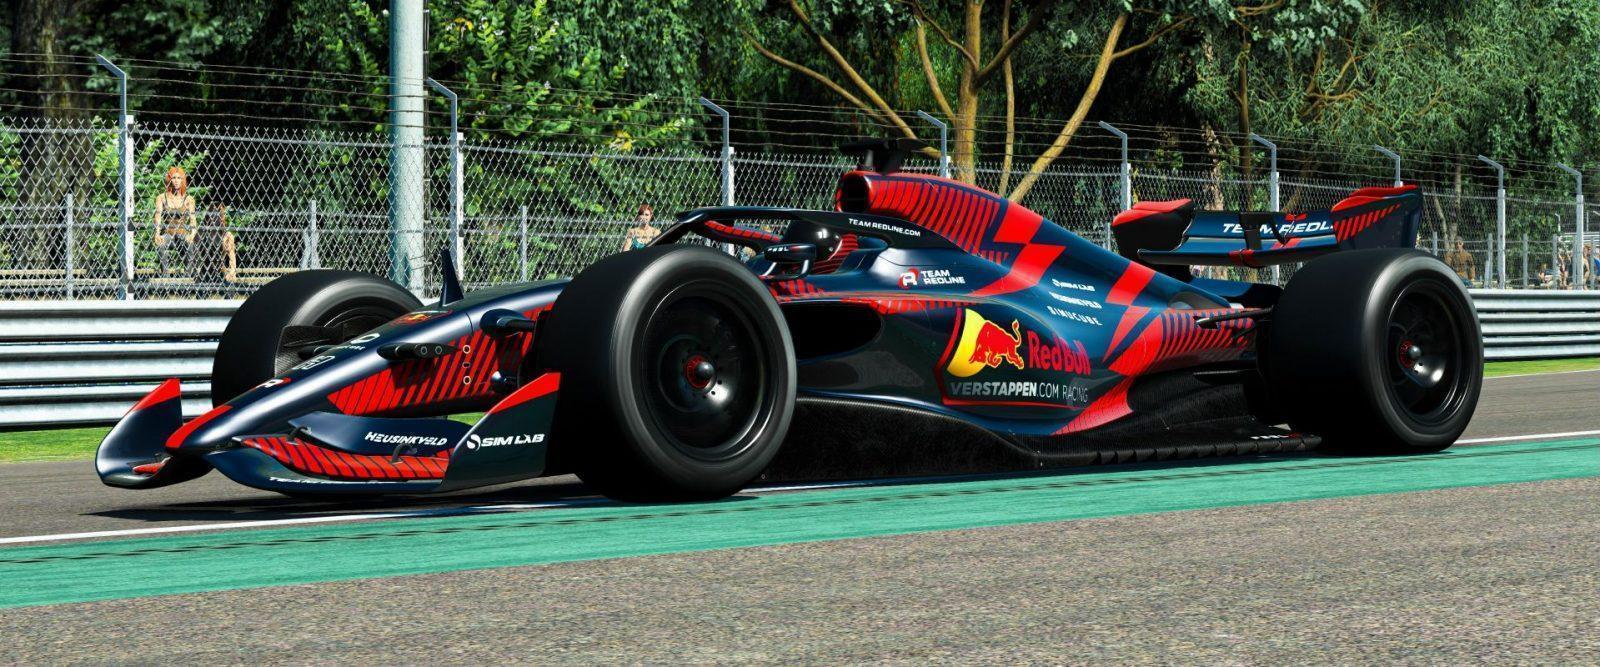 Max Verstappen Launches New Esports Racing Team